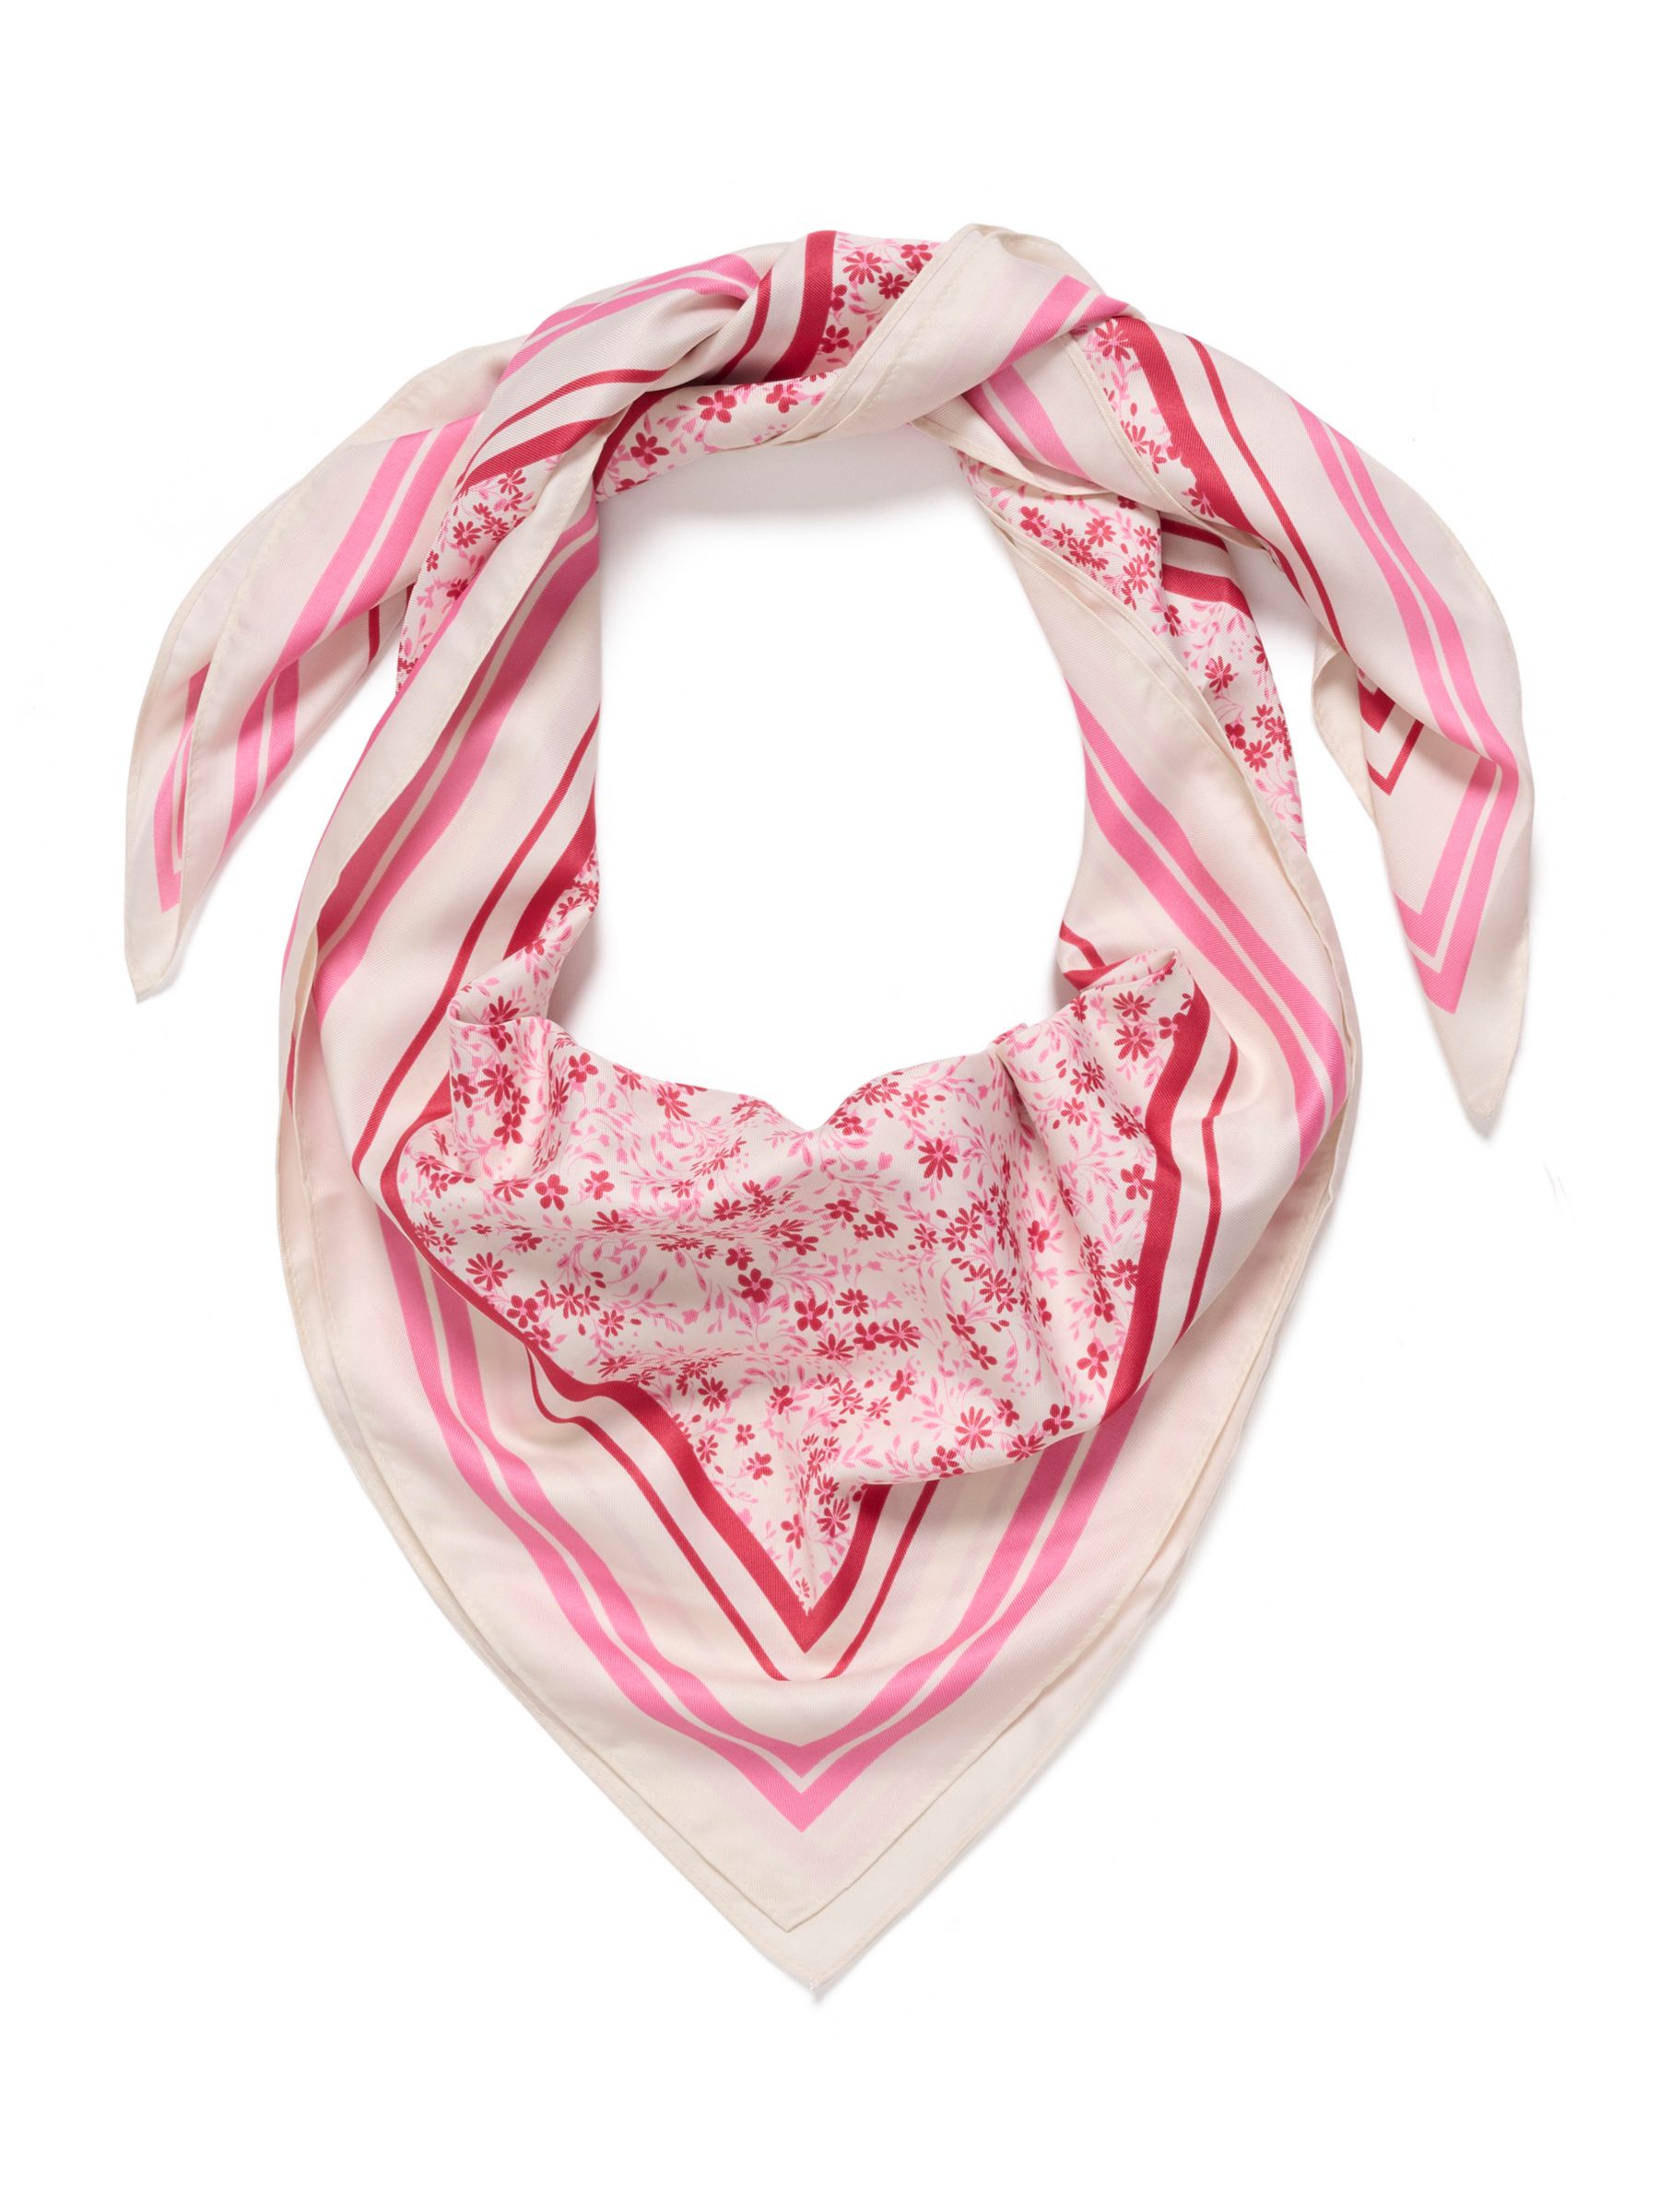 Part Two Namira Floral Square Scarf, Claret Red, One Size